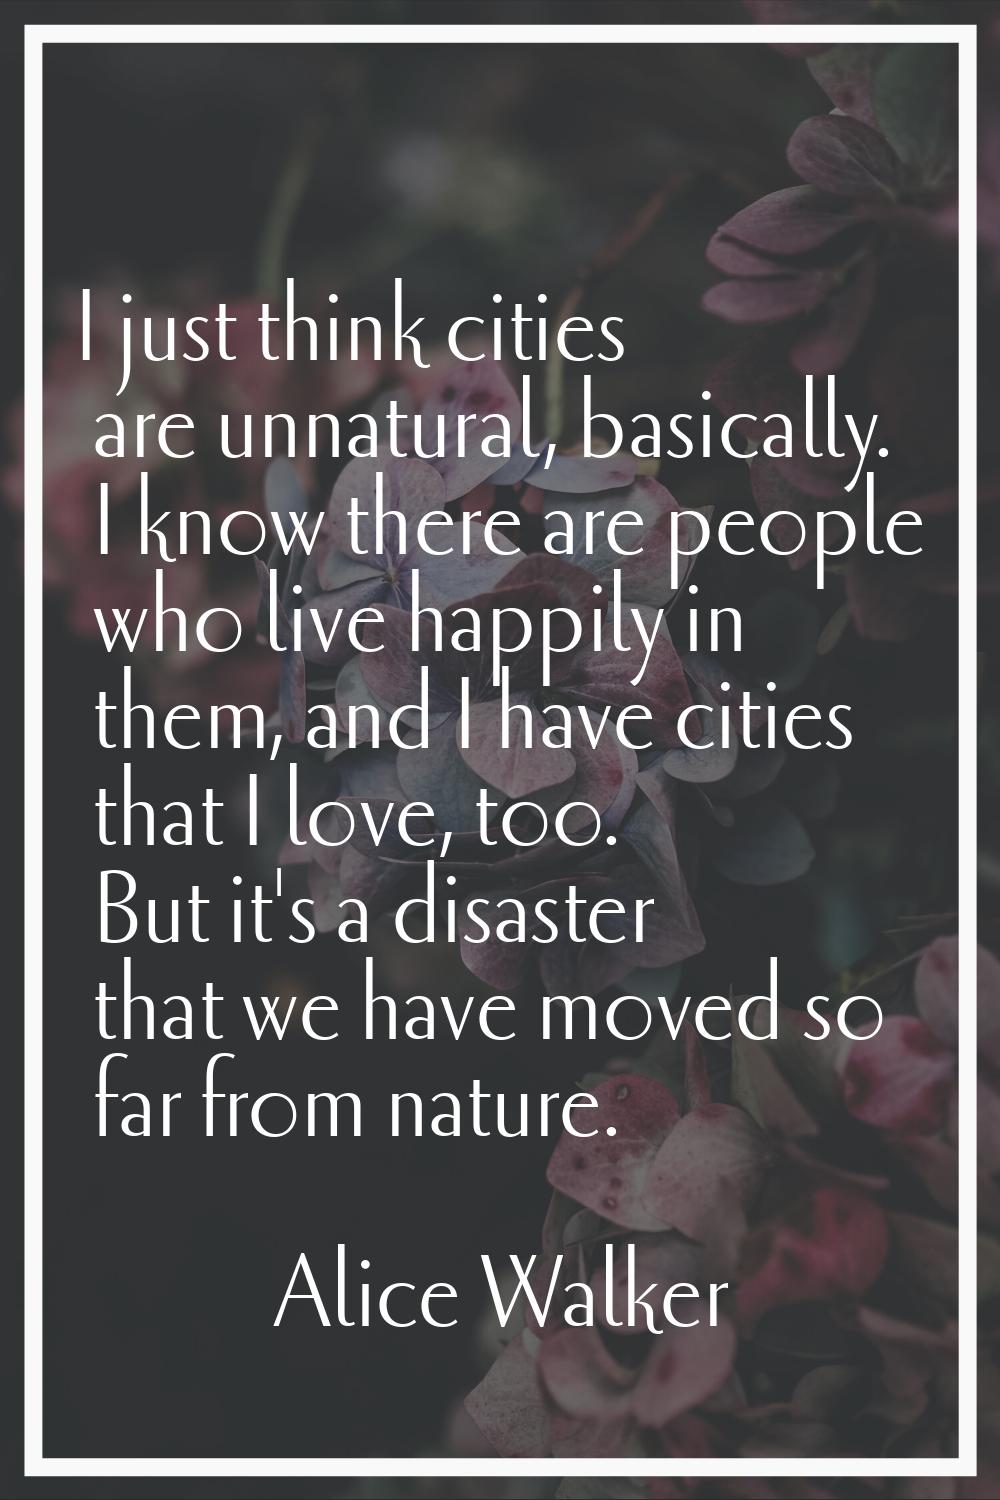 I just think cities are unnatural, basically. I know there are people who live happily in them, and